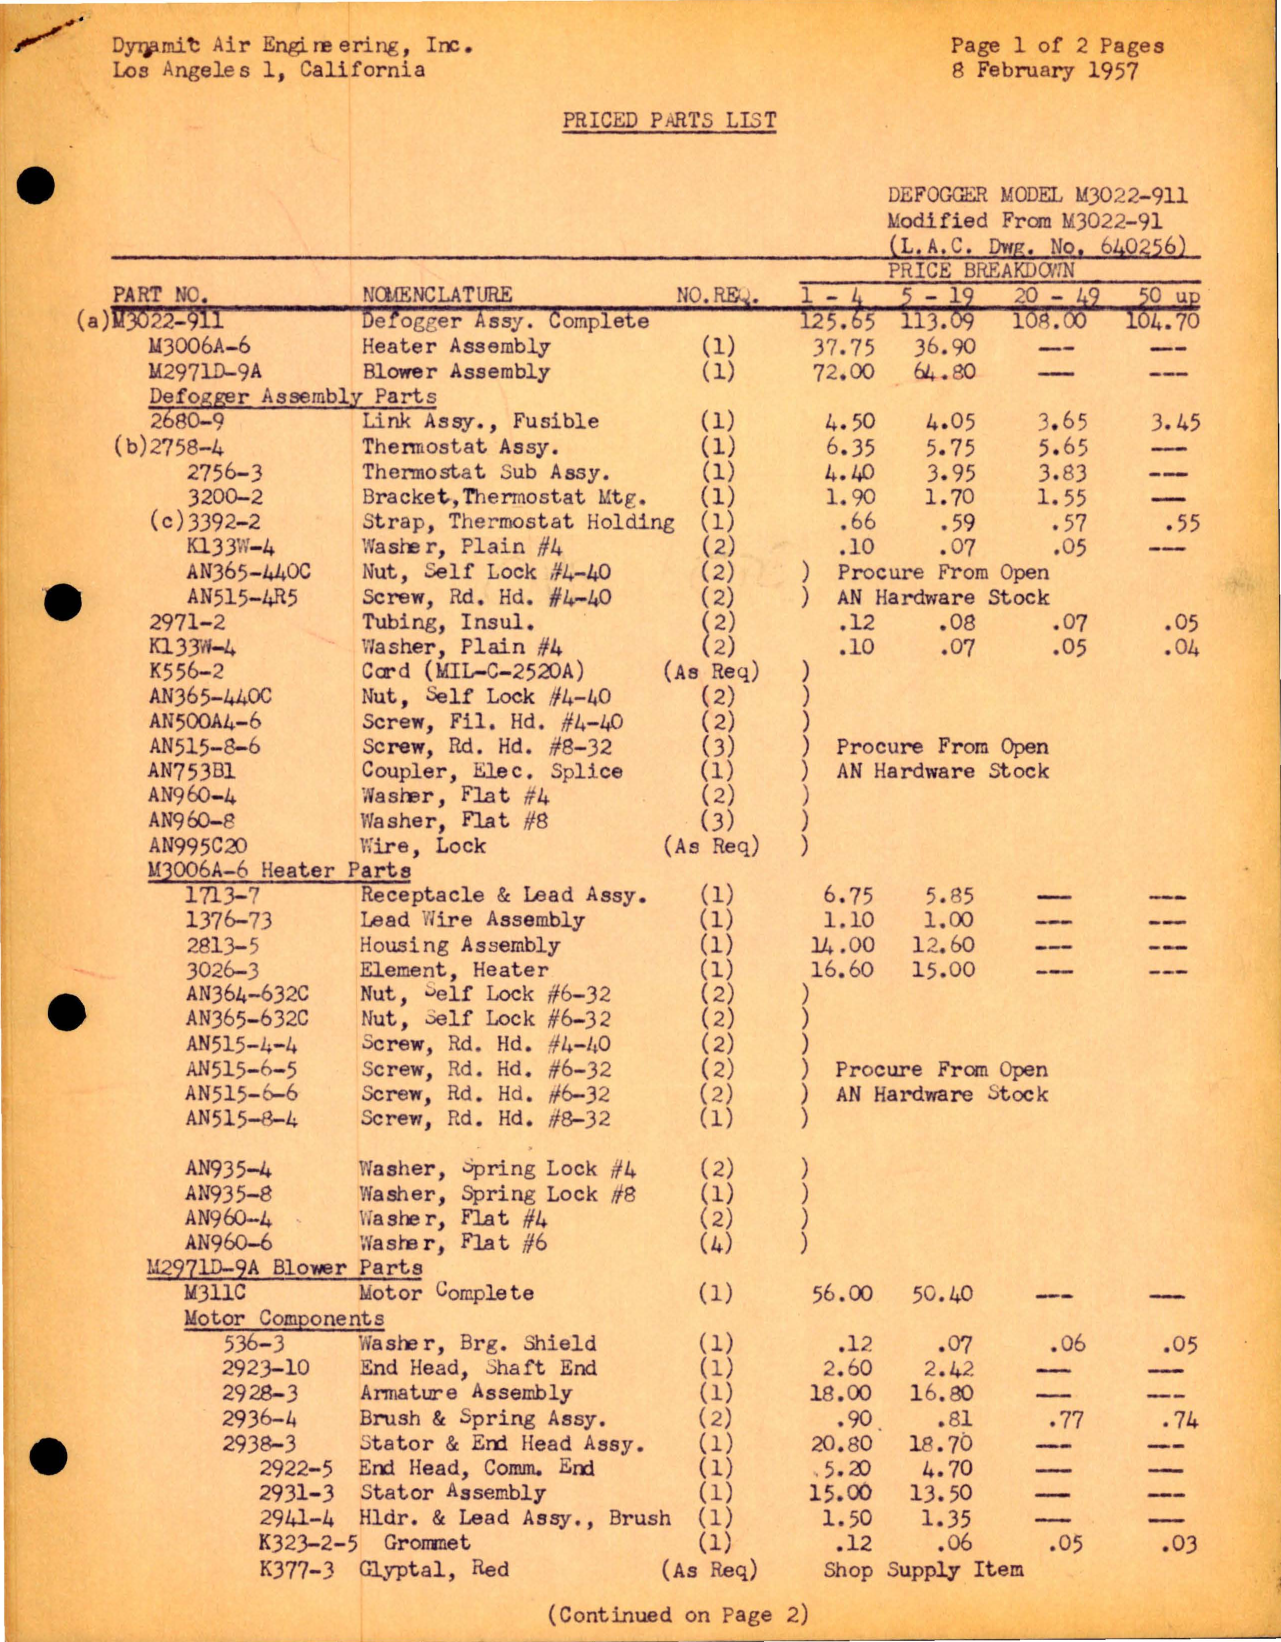 Sample page 1 from AirCorps Library document: Parts List for Defogger Assembly - Model M3022-911 